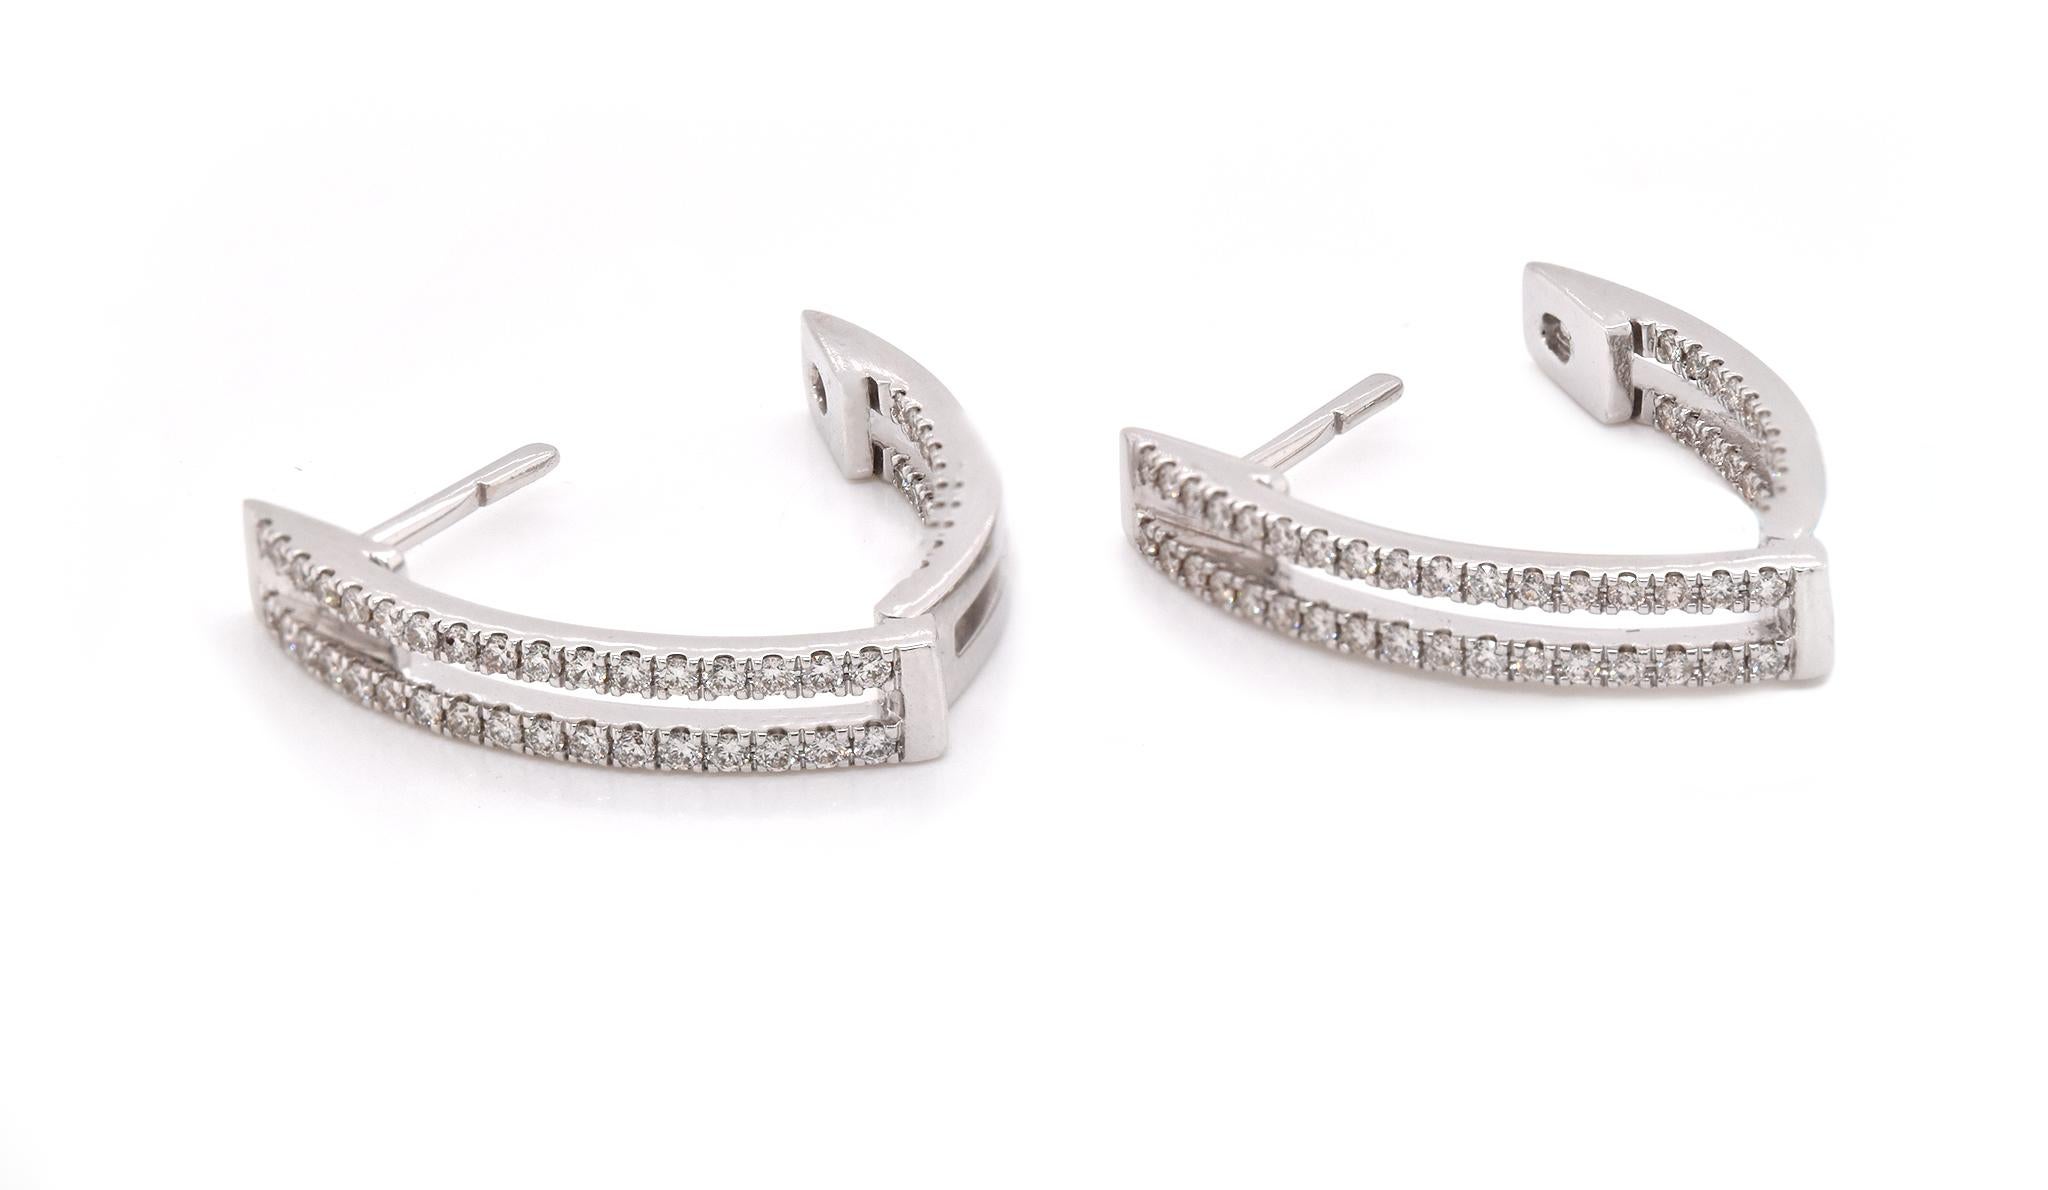 Material: 14k white gold
Diamonds: 108 round brilliant cuts = 0.65cttw
Color: G
Clarity: VS
Dimensions: earrings measure 23.15mm x 13mm
Fastenings: snap closure
Weight: 5.38 grams
